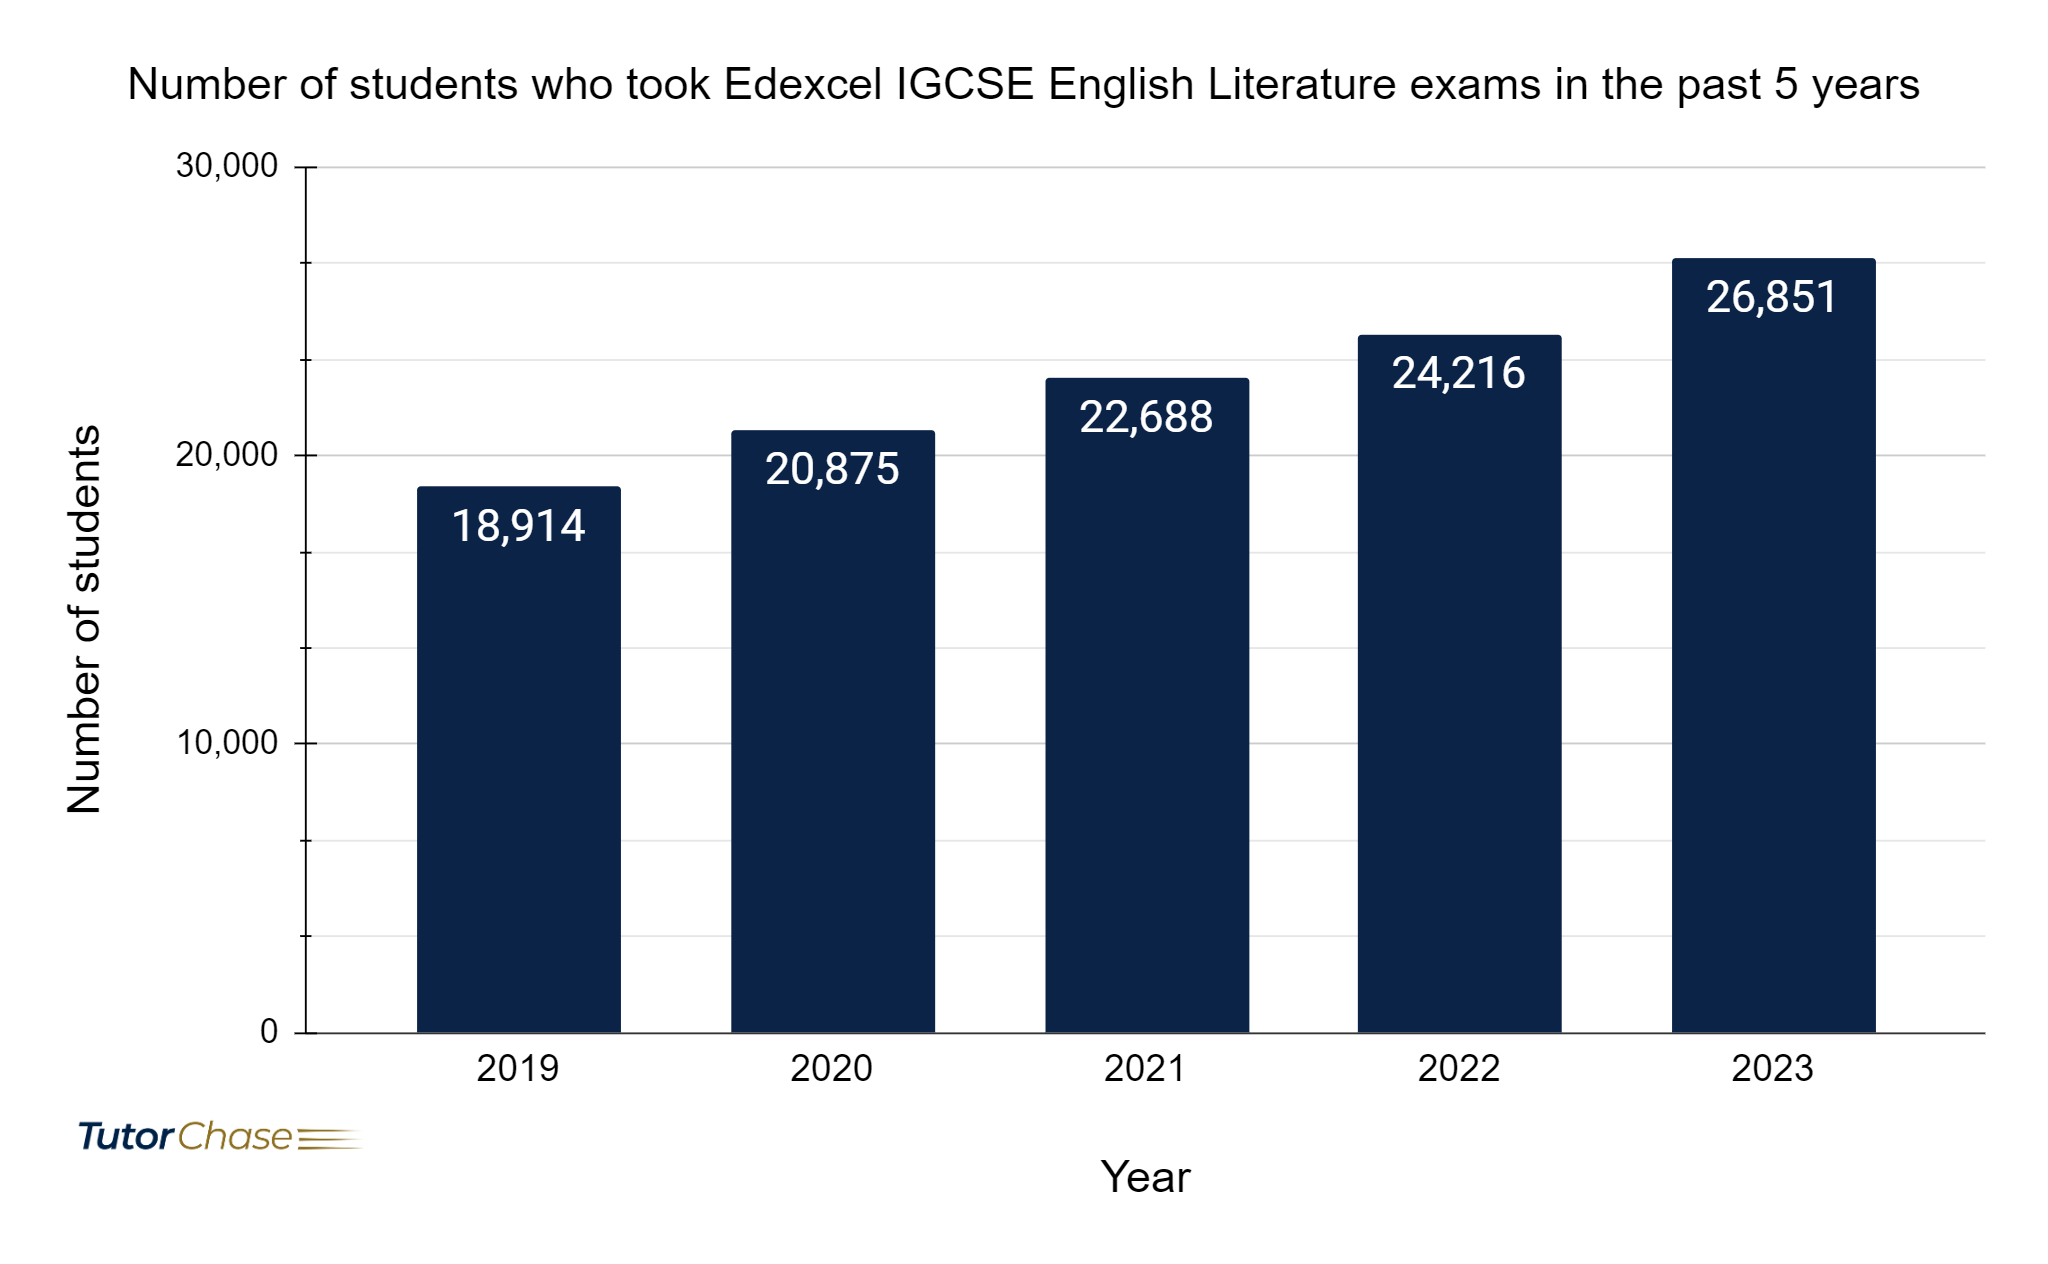 Number of students who took Edexcel IGCSE English Literature exams in the past 5 years